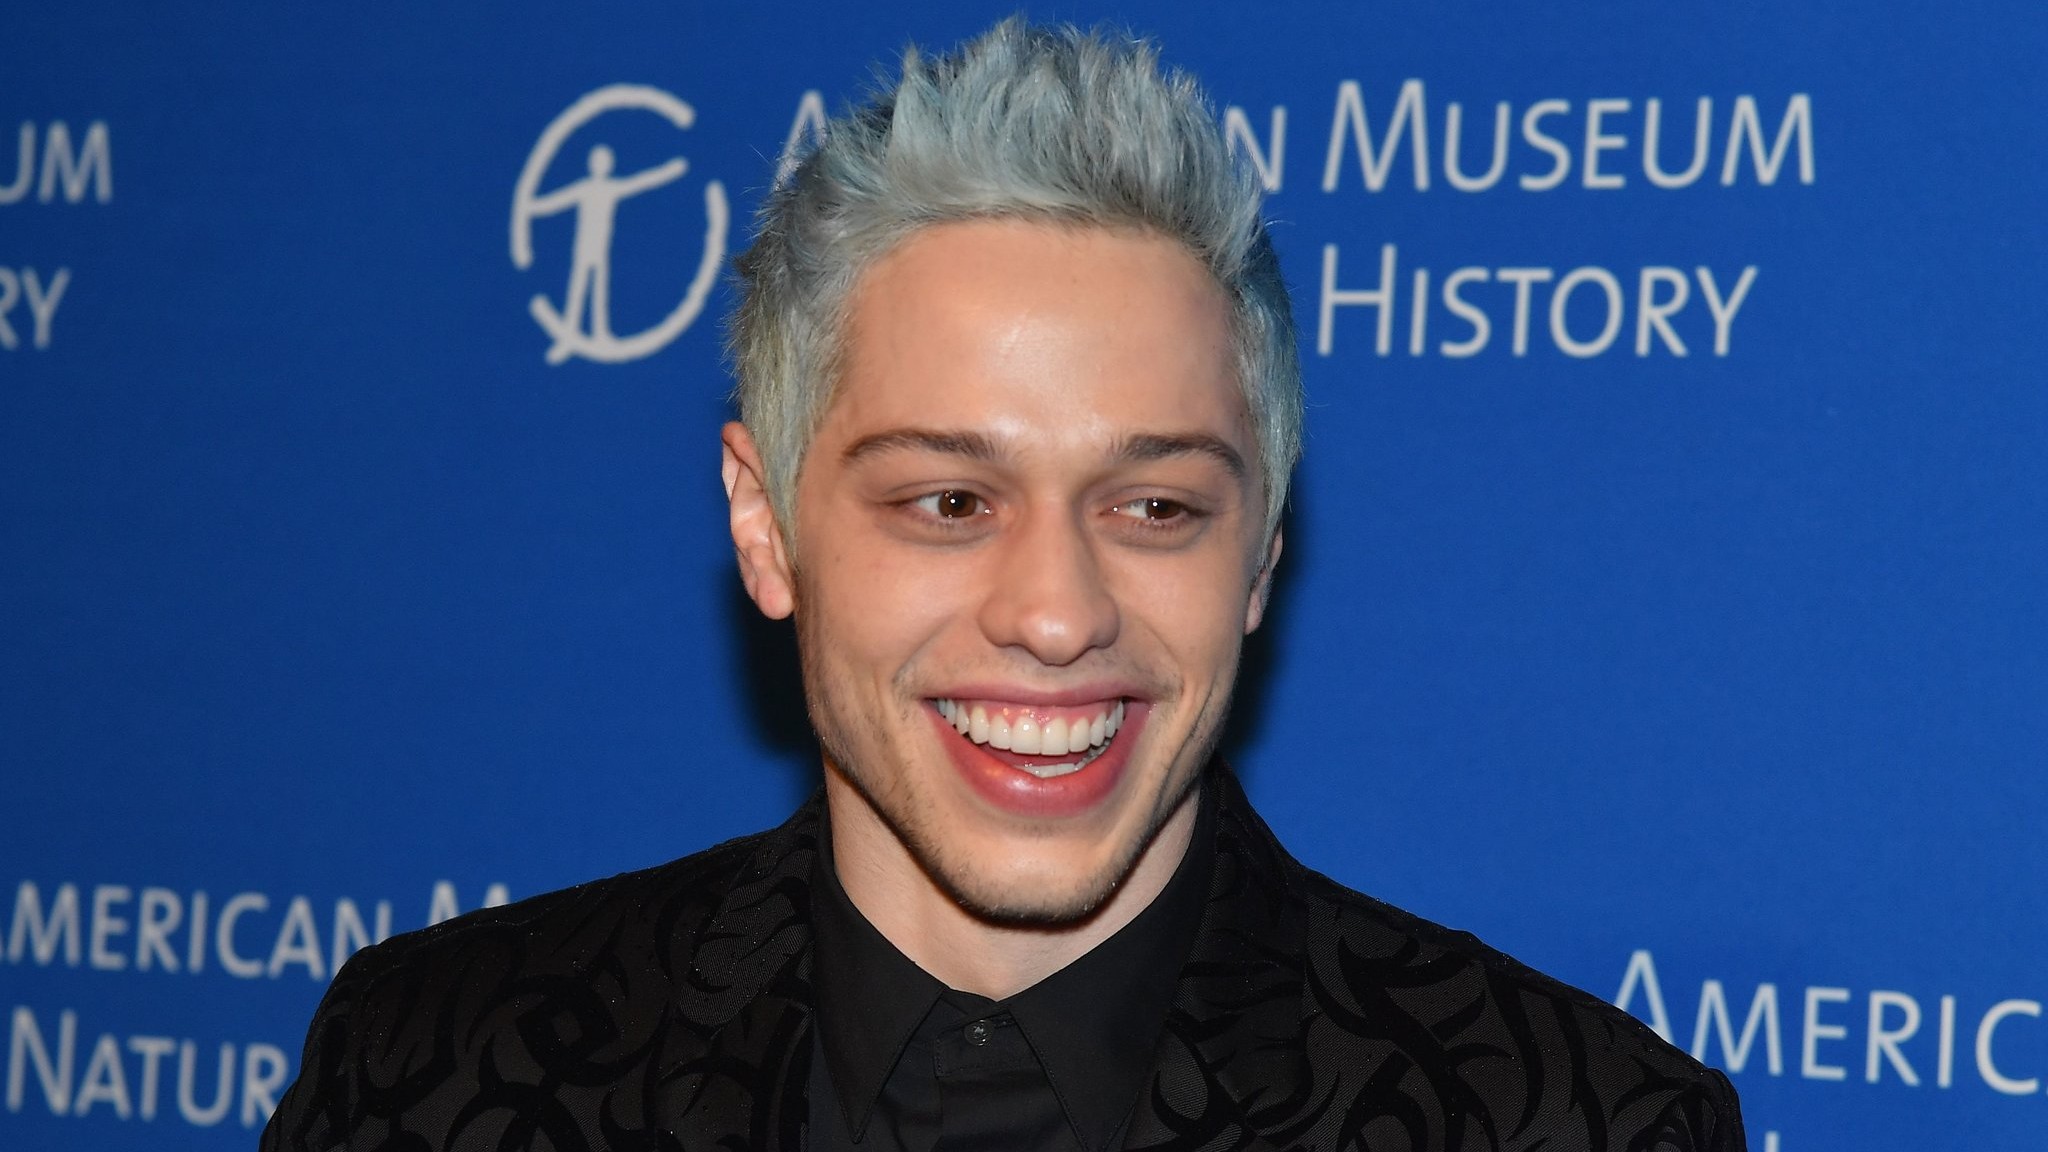 When Pete Davidson hilariously joked about marrying Ariana Grande, not the one we know, years after his split from the pop icon

+2023